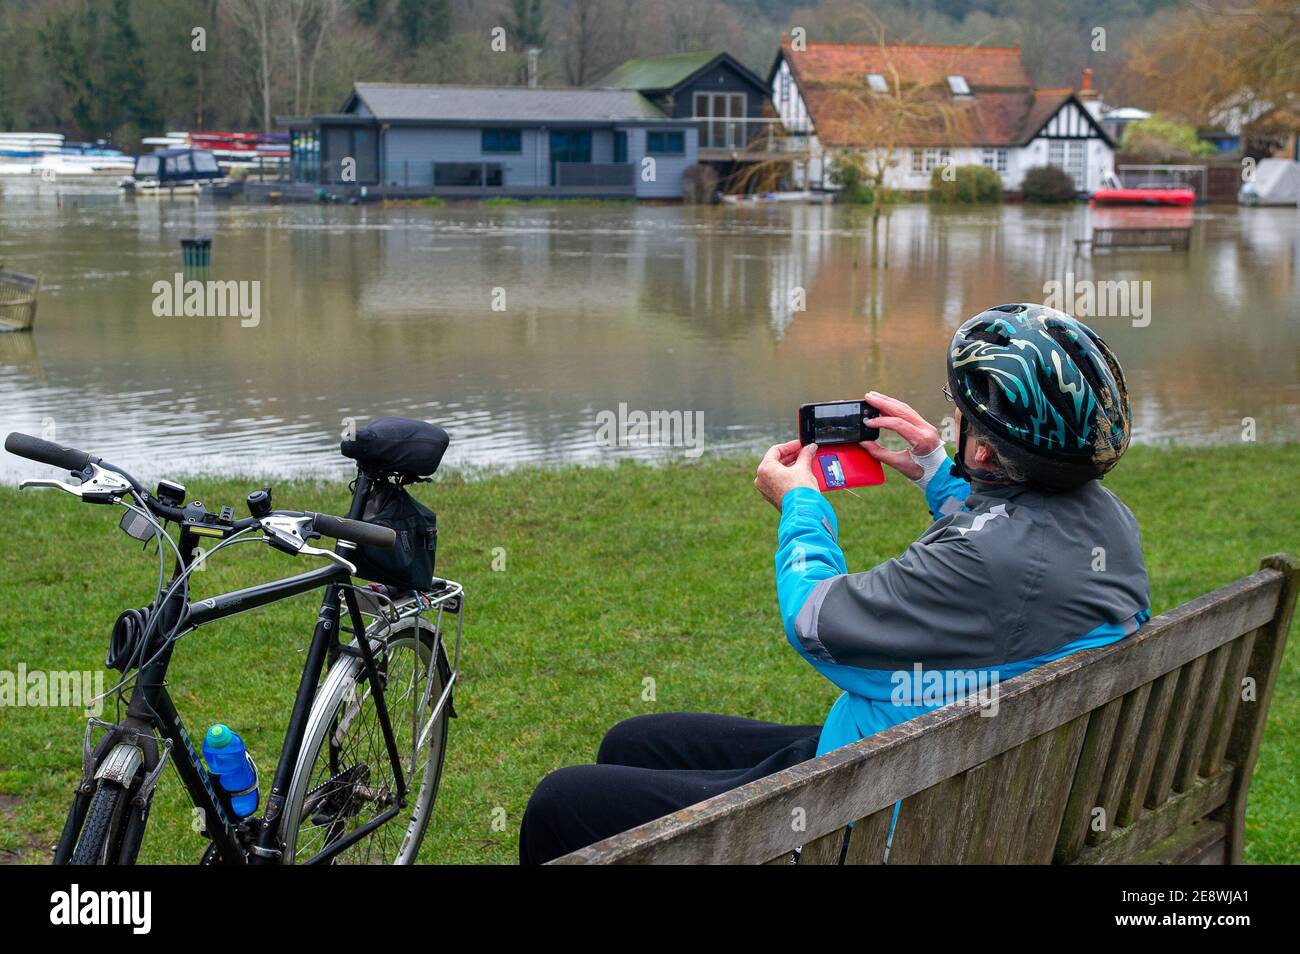 Henley-on-Thames, Oxfordshire, UK. 1st February, 2021. A cyclist stops to take a photo of the flooding. A flood warning is in place for the River Thames at Henley. Property flooding is expected to continue today and those living near the River Thames have been asked to activate their flood barriers. Many of the fields used for the famous Henley Royal Regatta are now under water. Credit: Maureen McLean/Alamy Live News Stock Photo